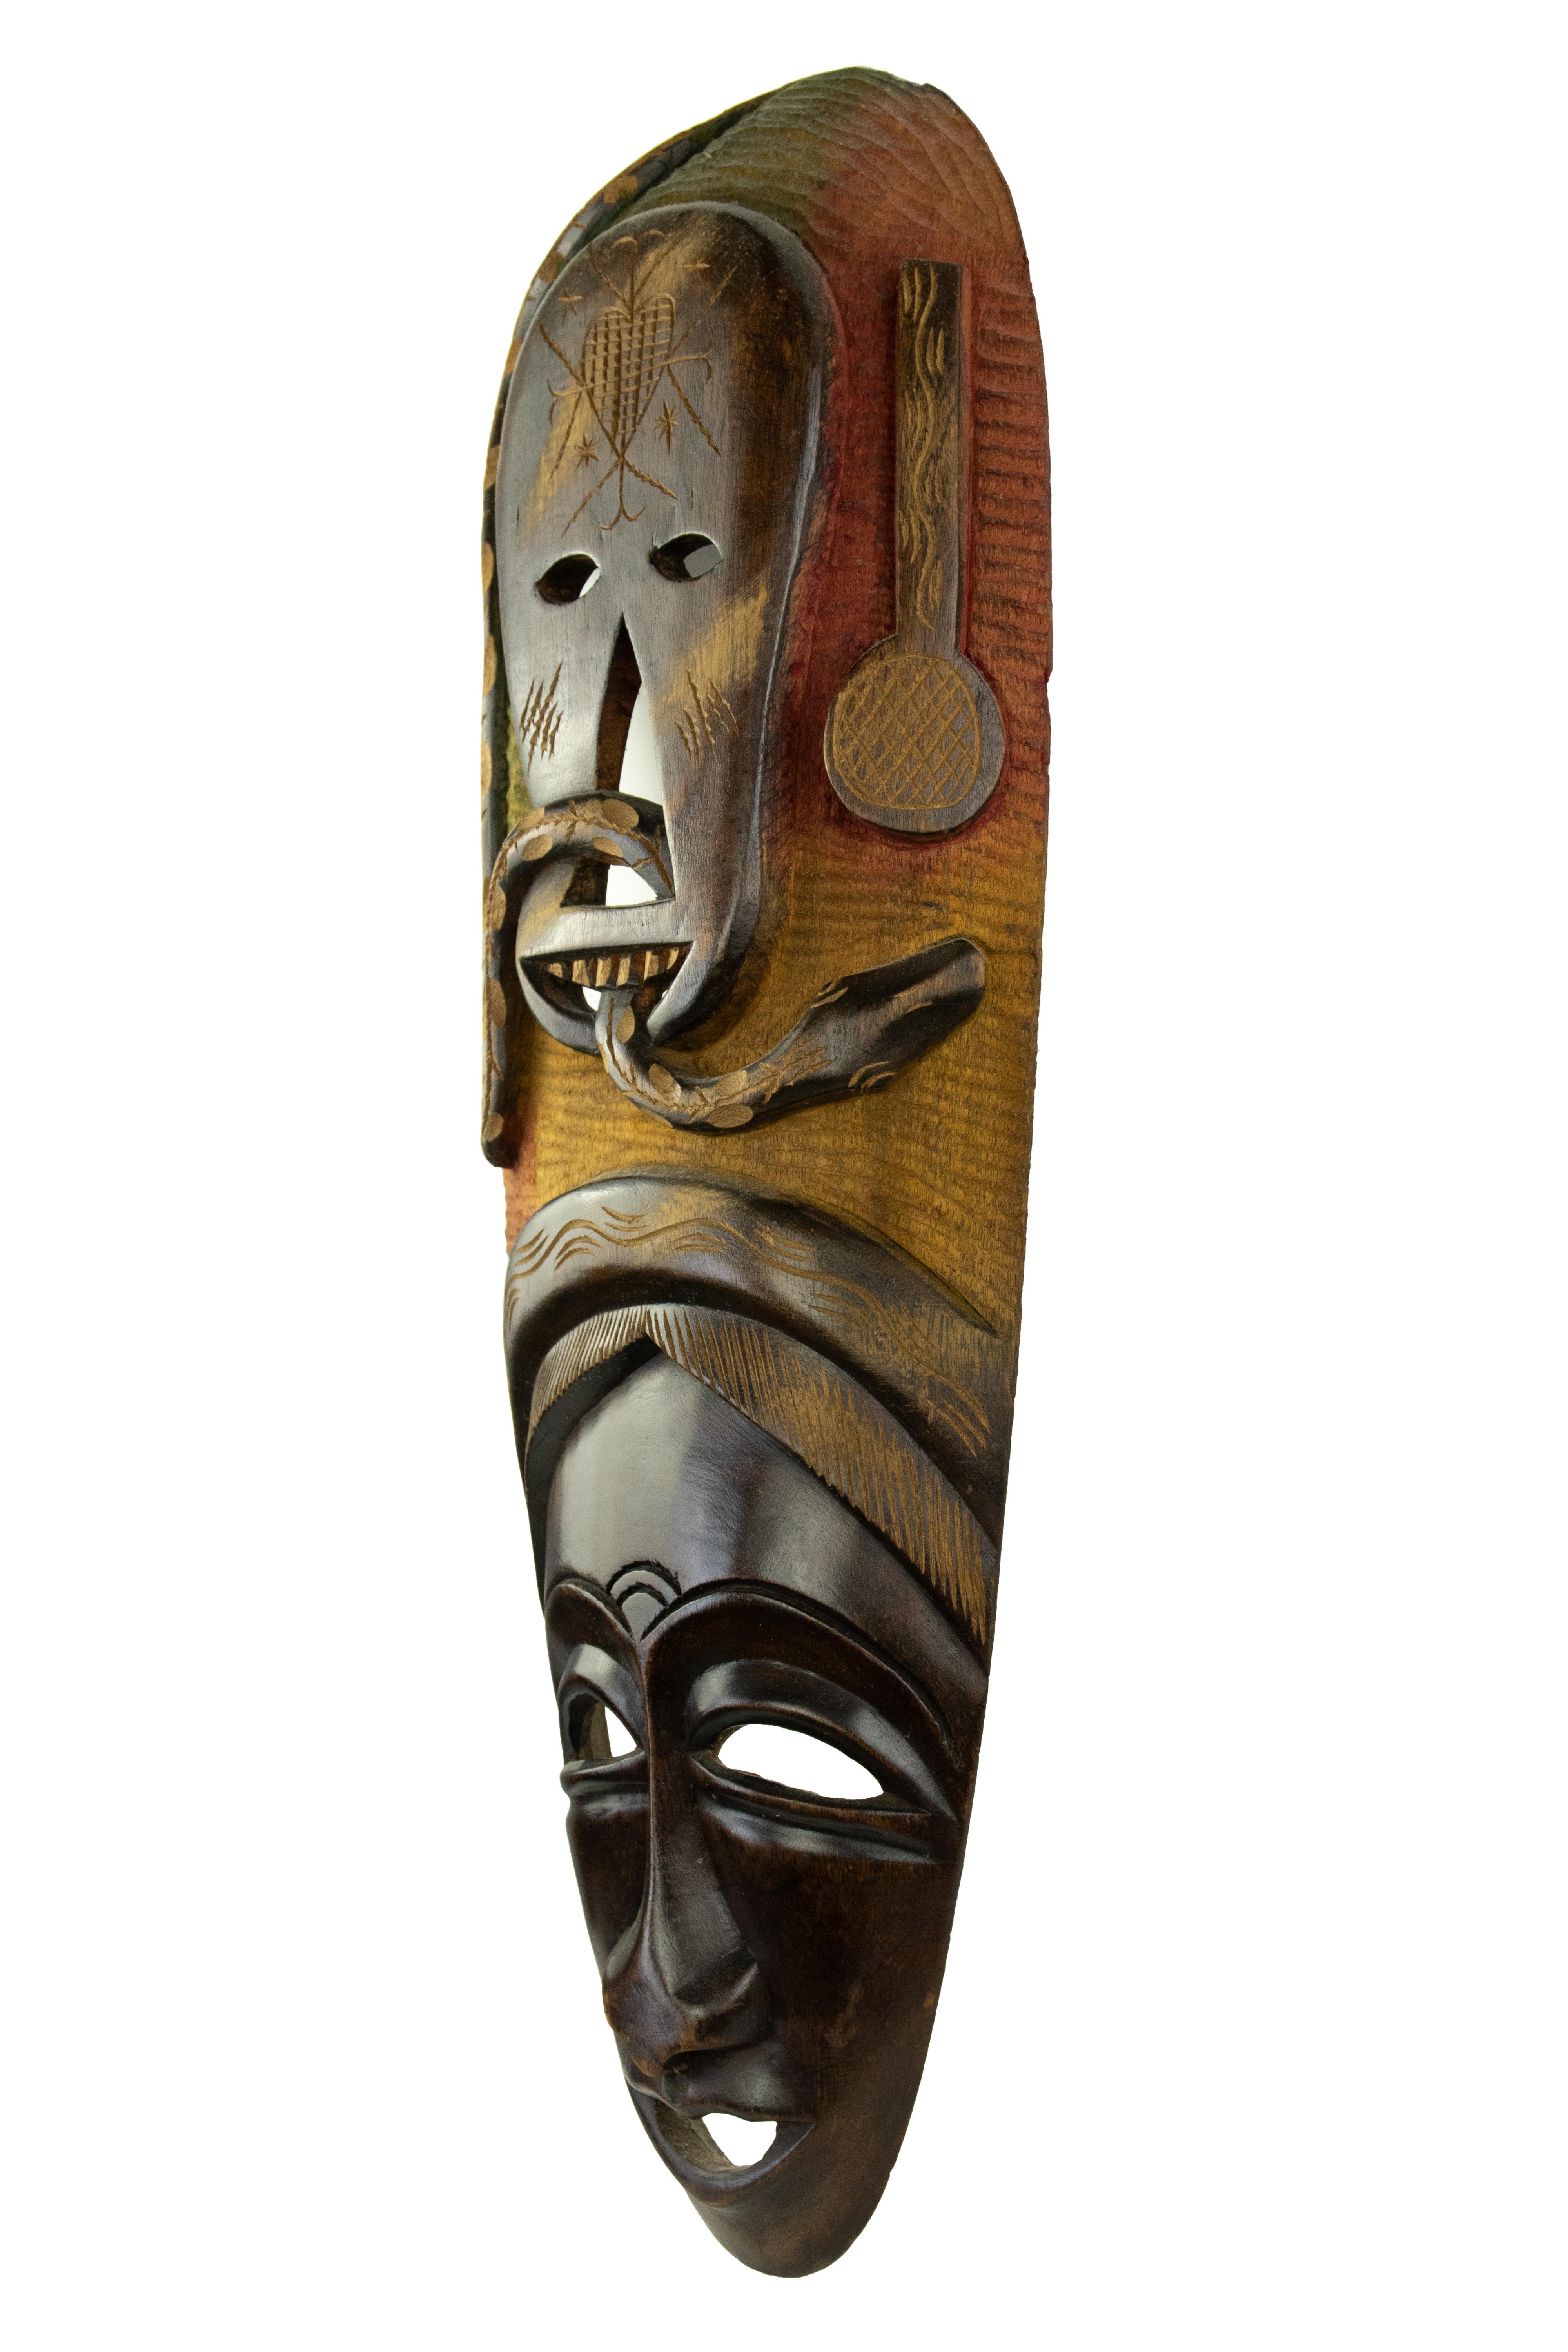 Vintage Wooden Decorative Mask,  mid-20th Century.

Wood and fabric.

61 x 24 cm.

Good conditions!